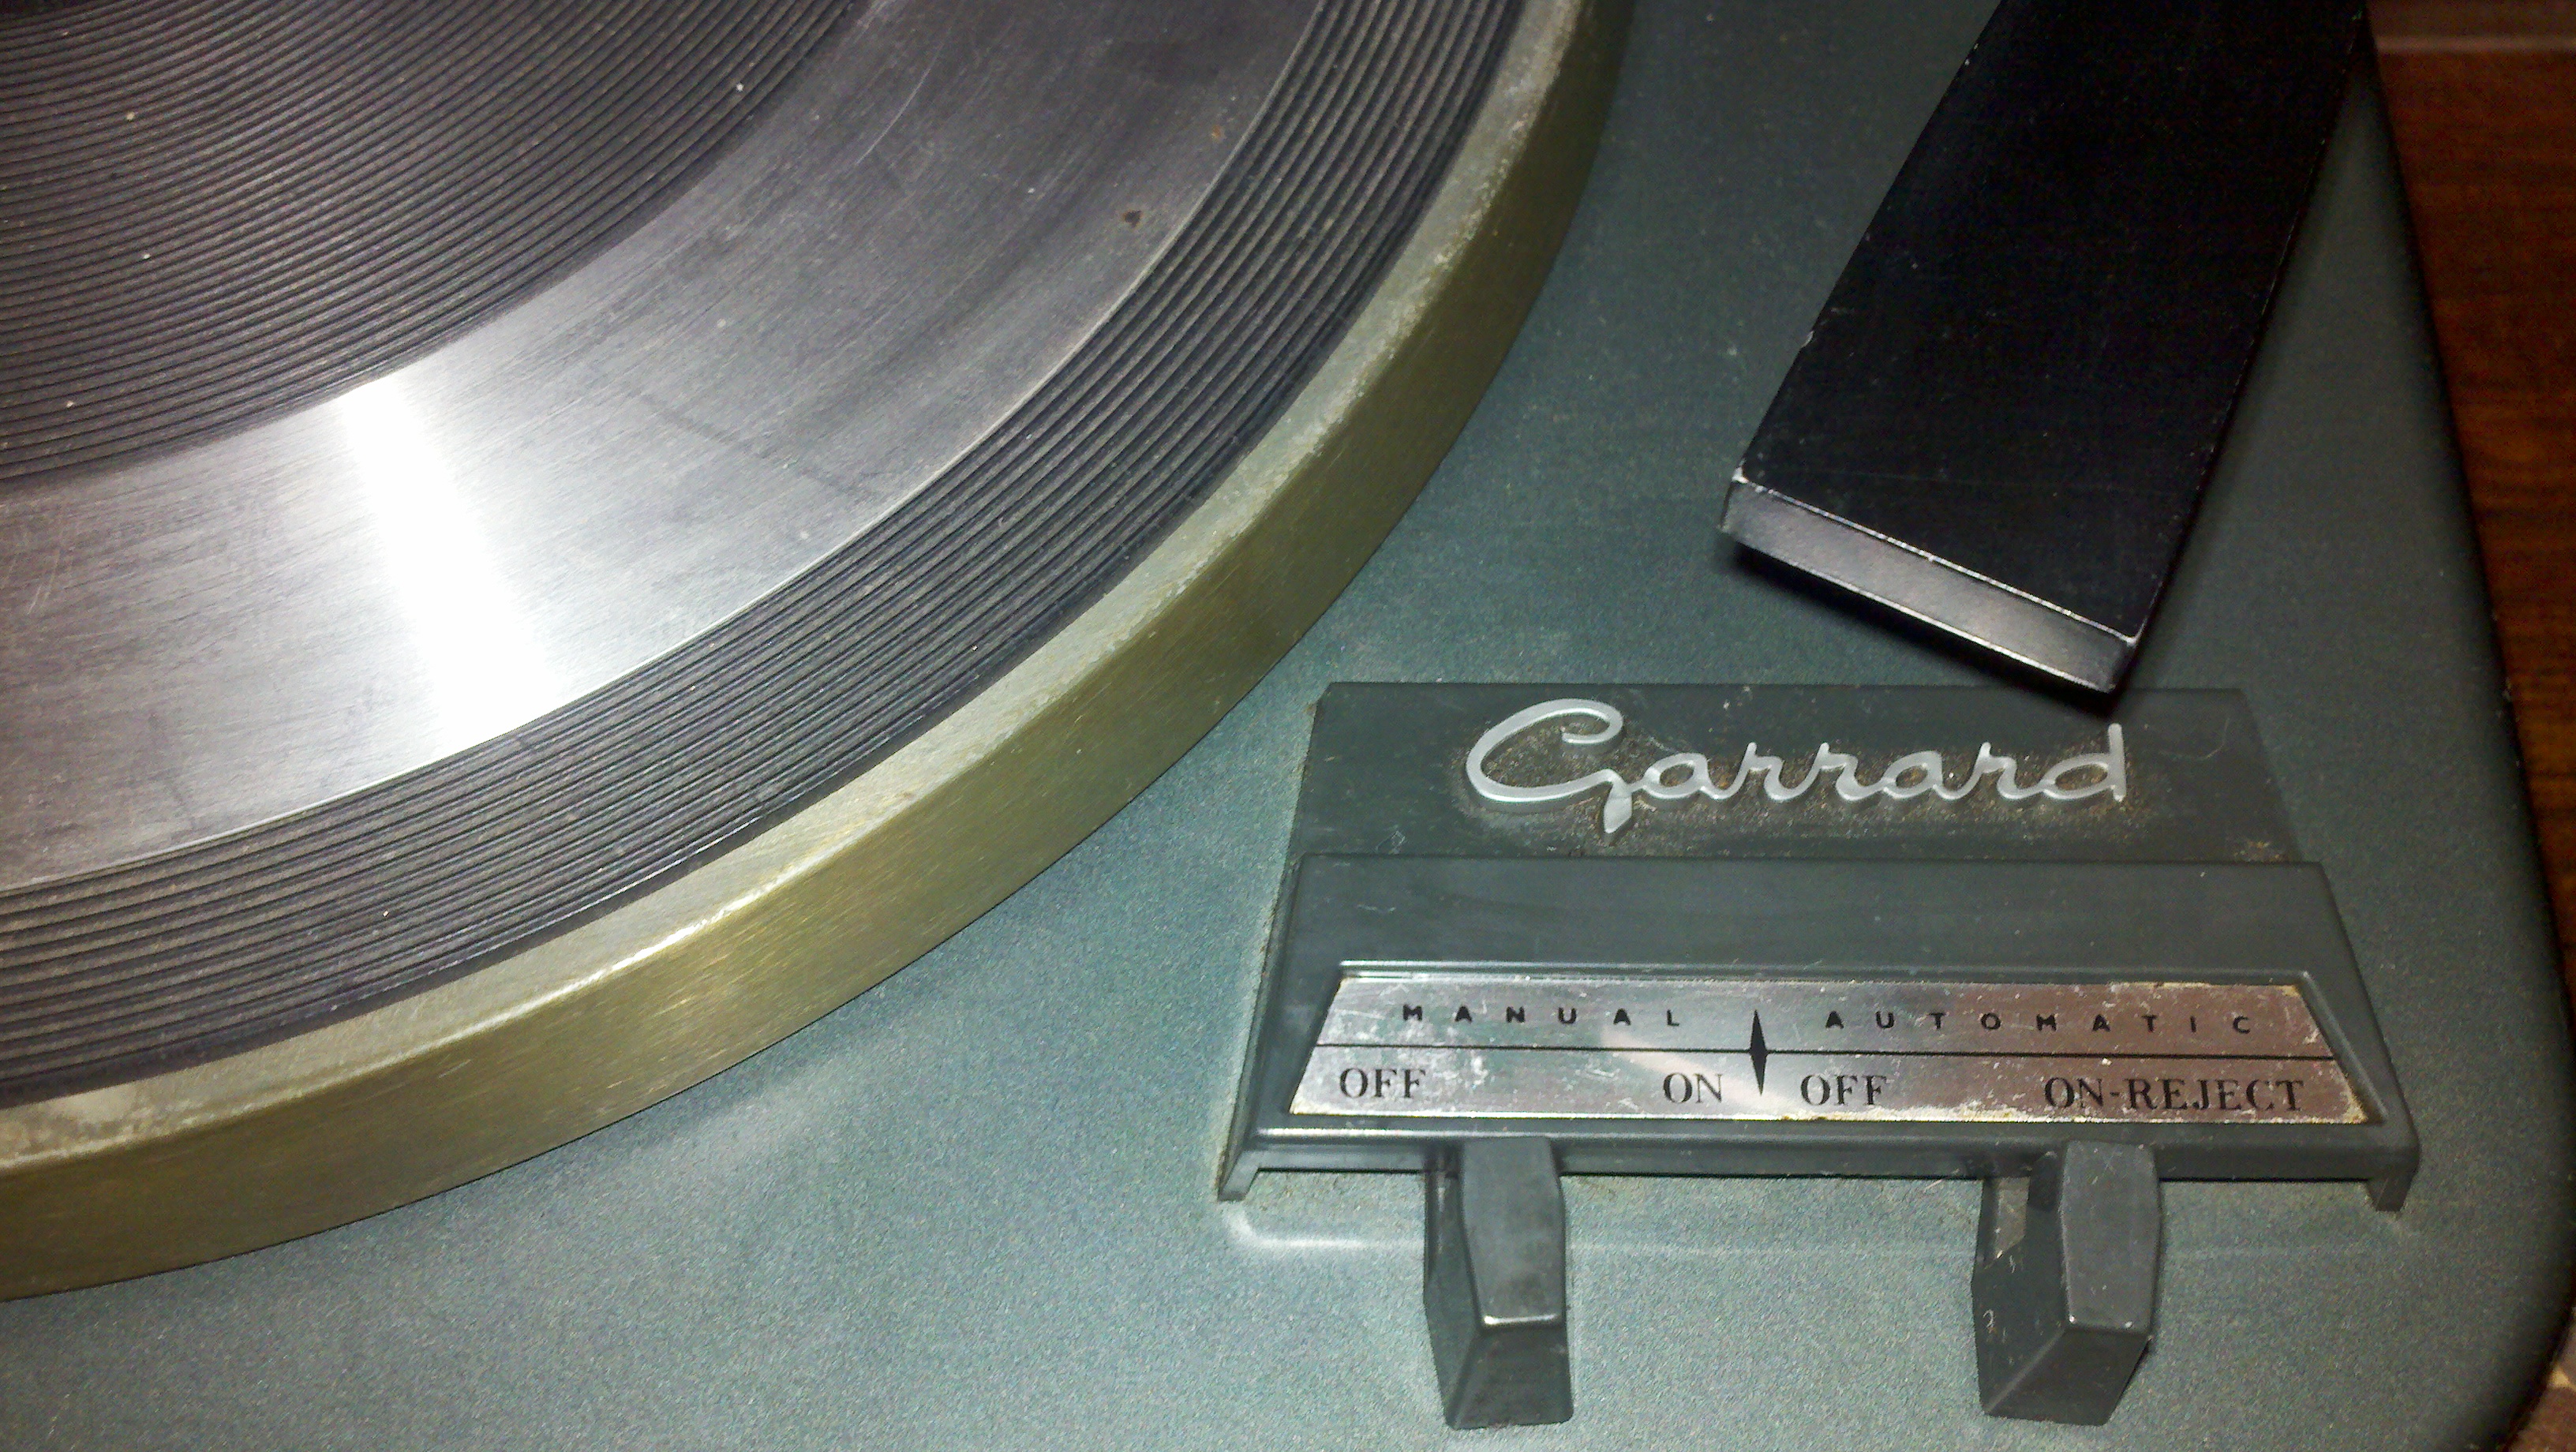 Many record turntables featured a semi-automatic reject mechanism